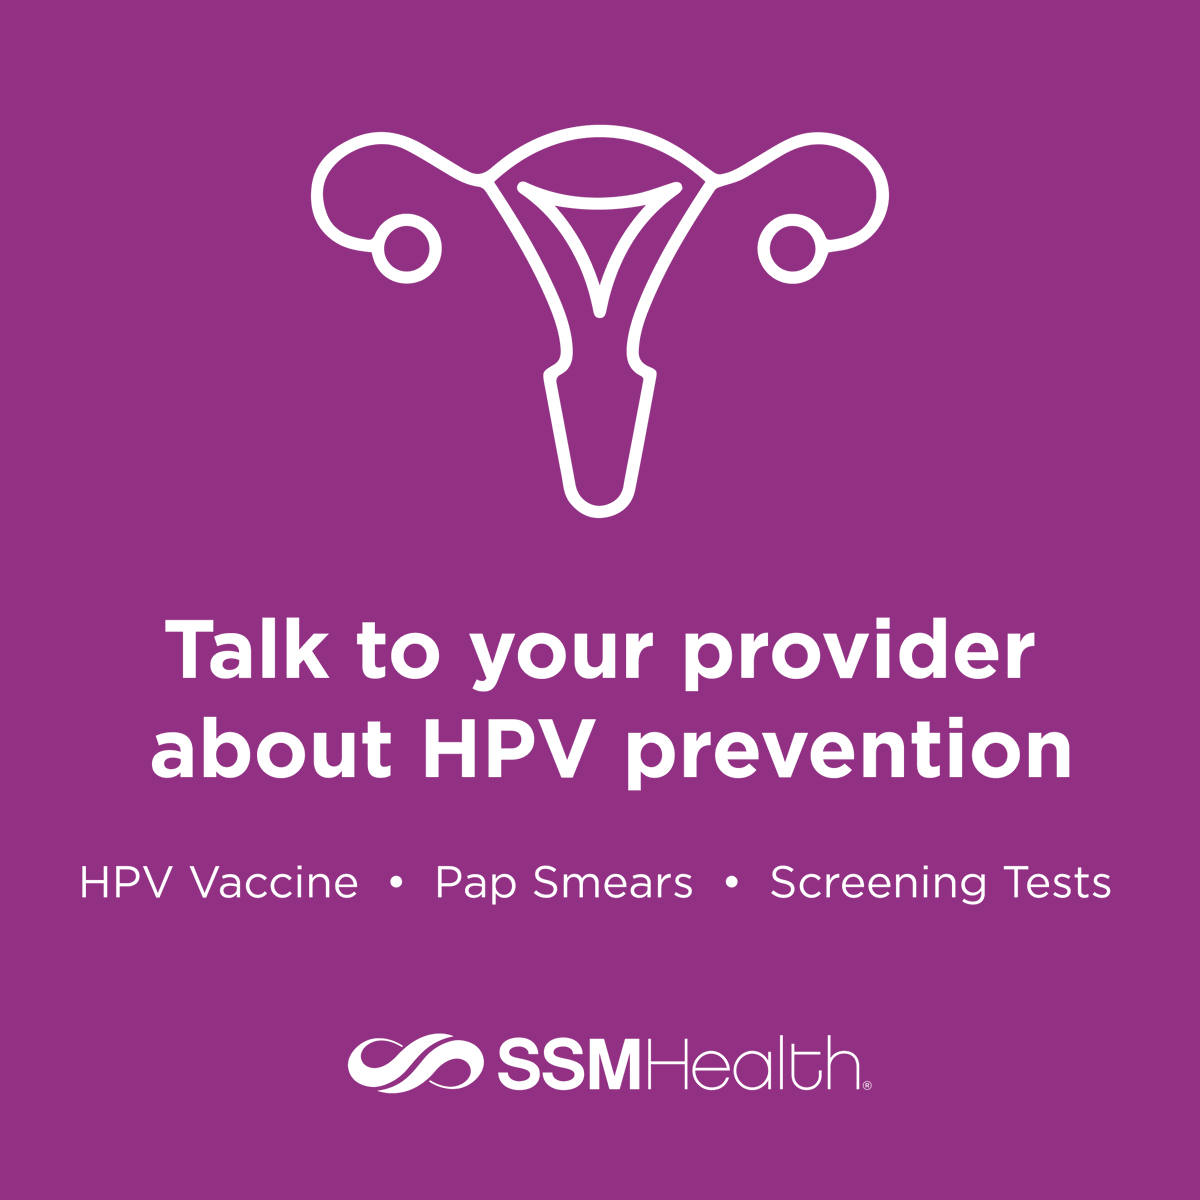 Cervical cancer affects thousands of women every year, but the good news is that it can be prevented. Stay informed about prevention methods and take control of your cervical health. Learn more: ow.ly/NmOH50HjTPP #CervicalHealth #PreventionIsKey #CervicalCancerAwareness